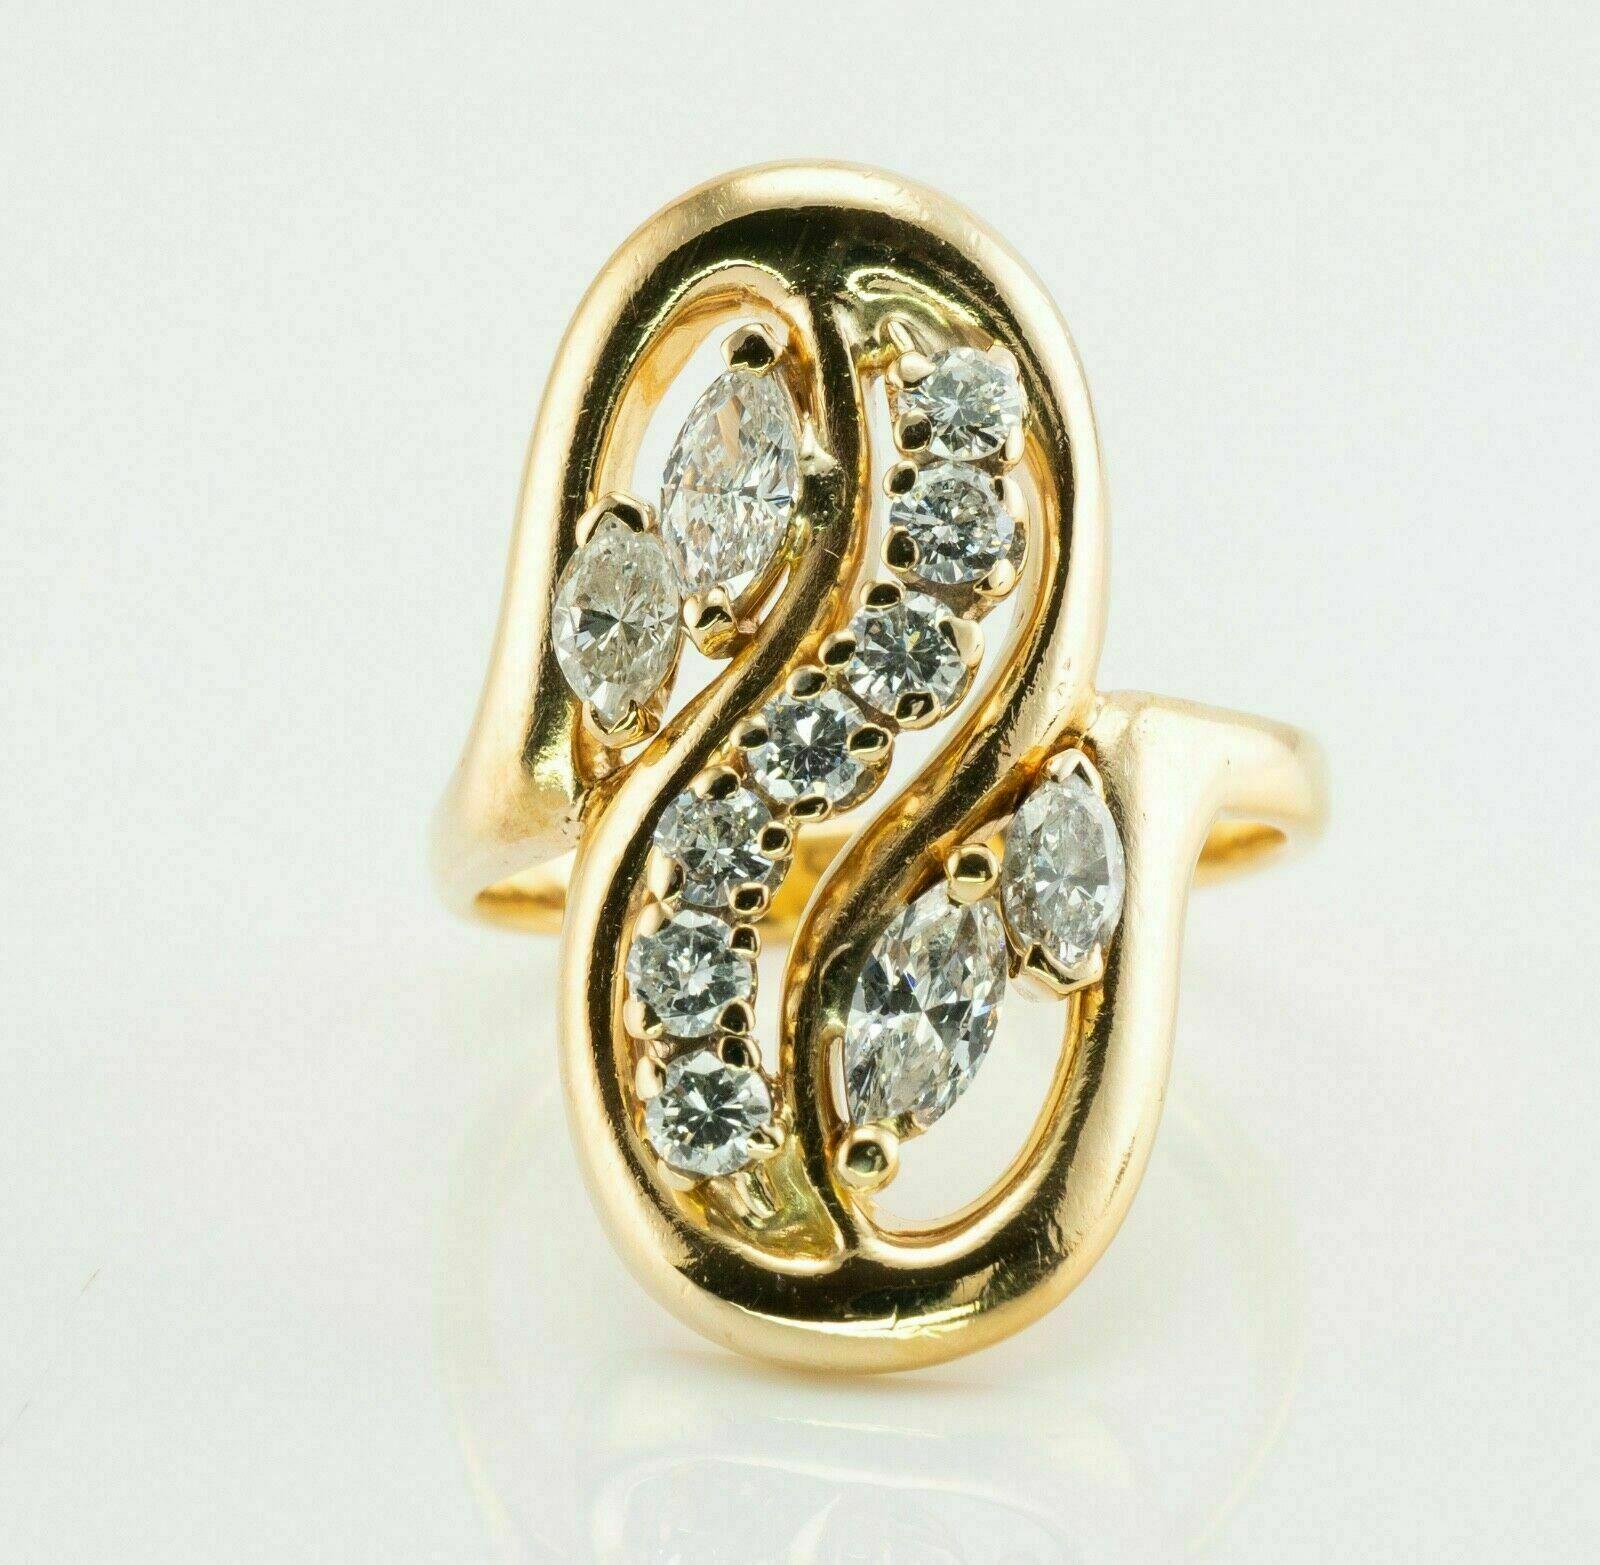 This vintage diamond ring is crafted in solid 14K Yellow Gold (carefully tested and guaranteed). The ring holds four marquise cut diamonds and seven round brilliant cut diamonds. Two marquise are .50 carat total, two smaller marquise are .36 carat